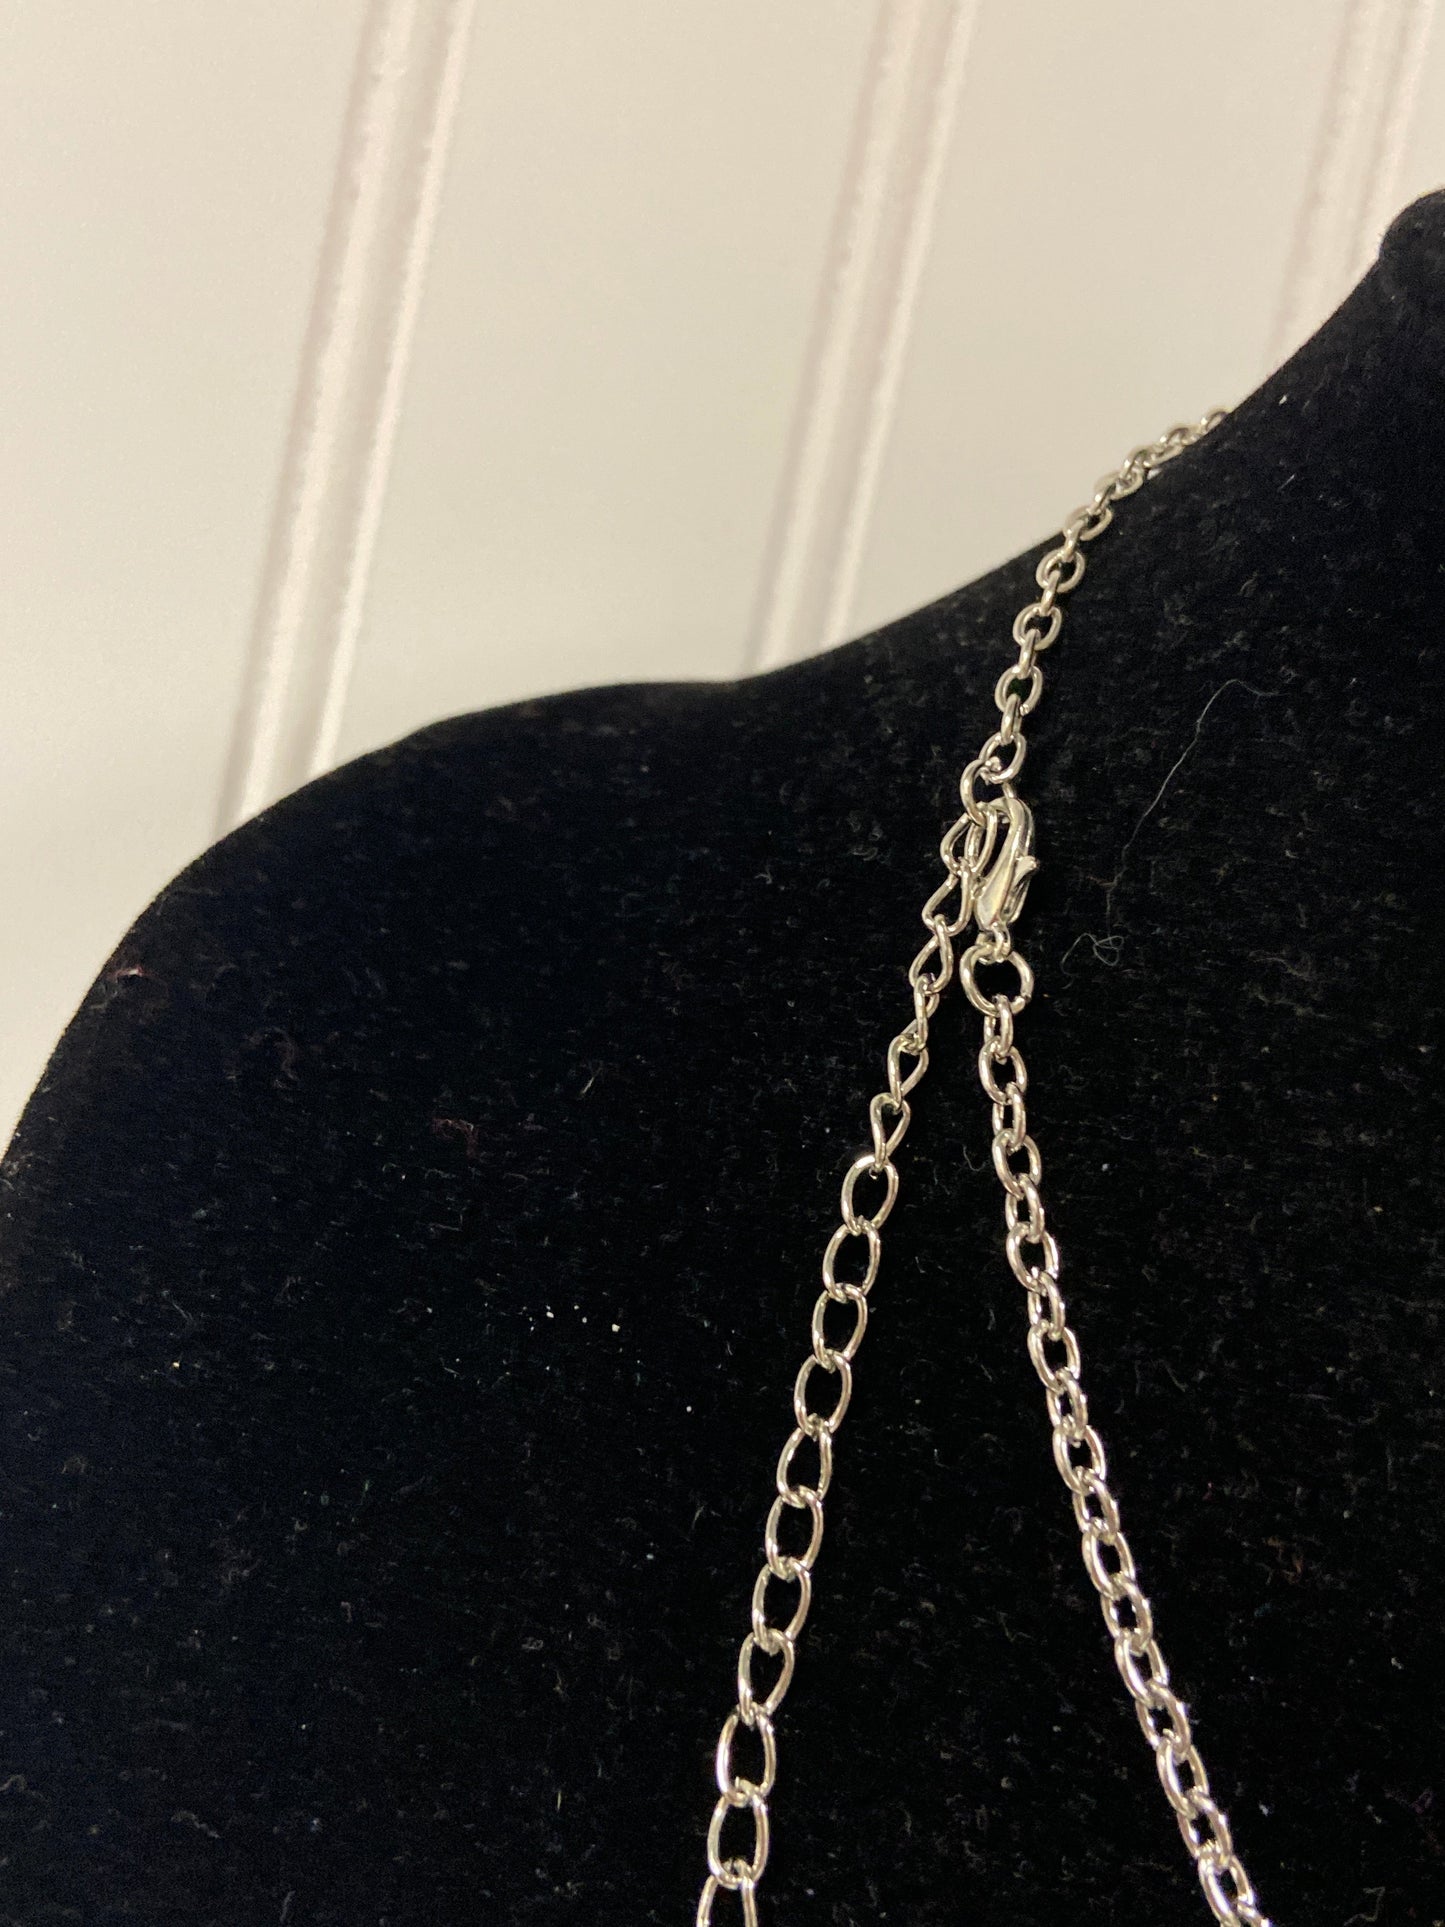 Necklace Statement By Clothes Mentor  Size: 1